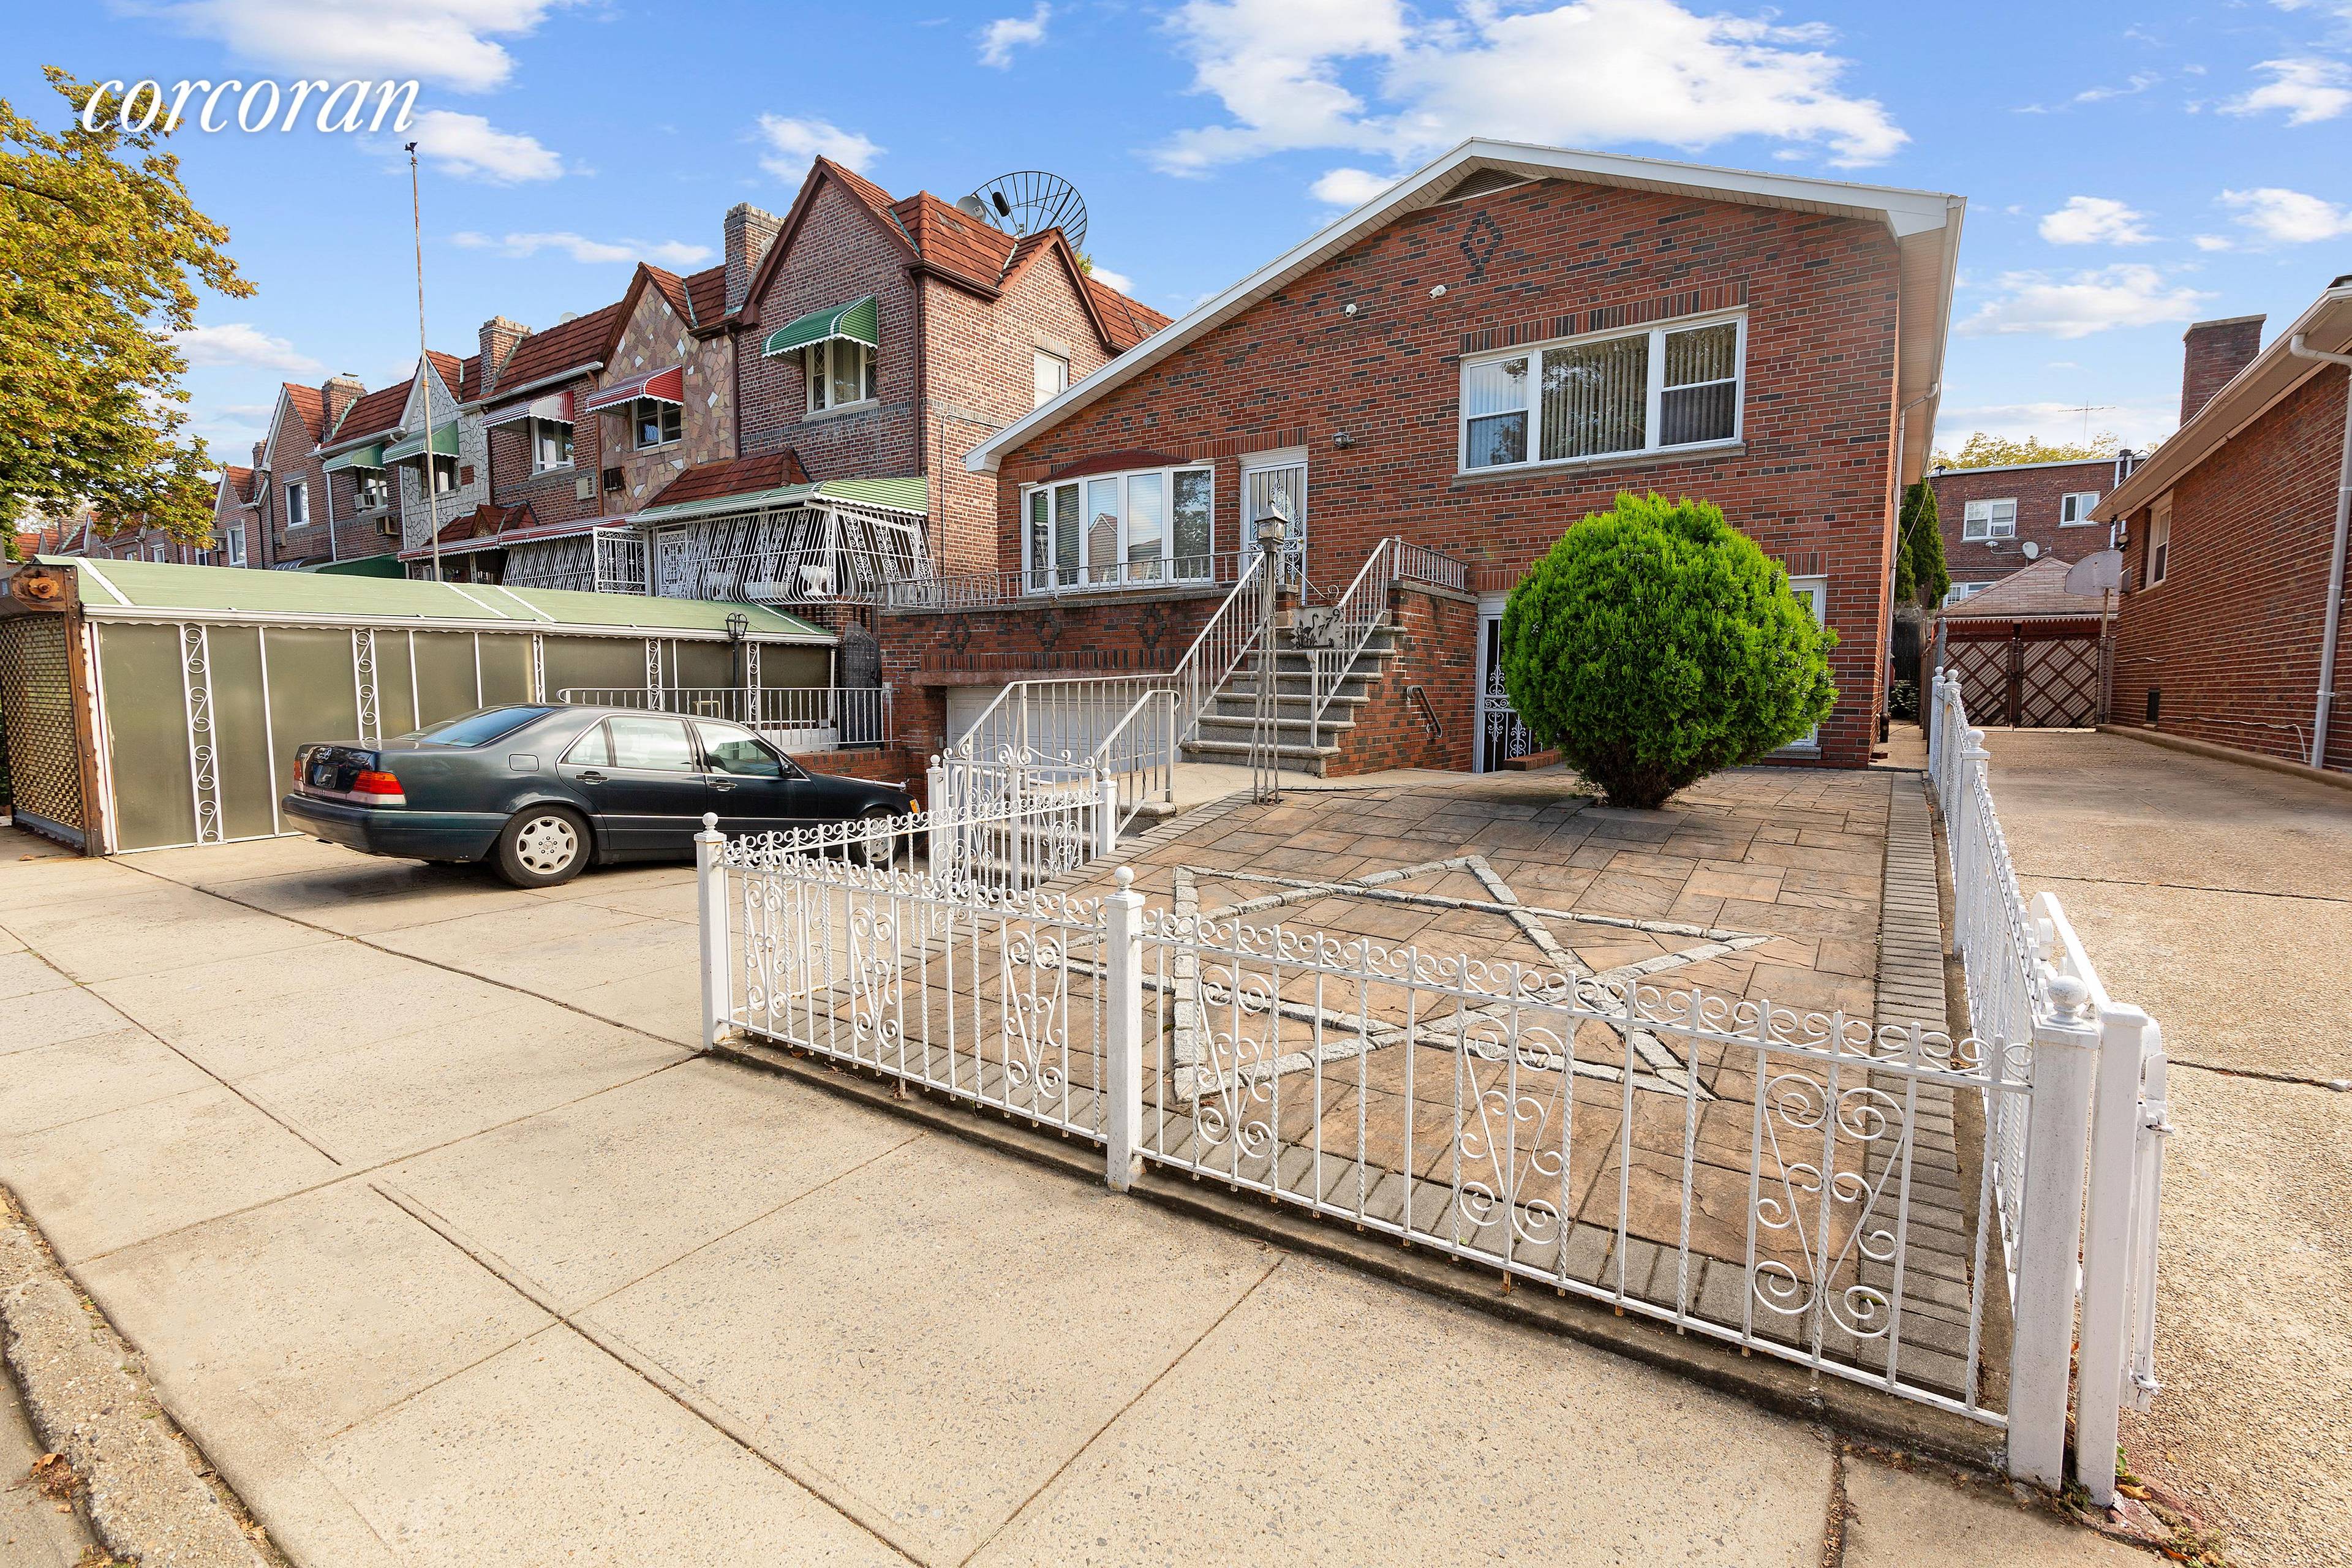 Welcome home to 779 E 39th Street in East Flatbush.